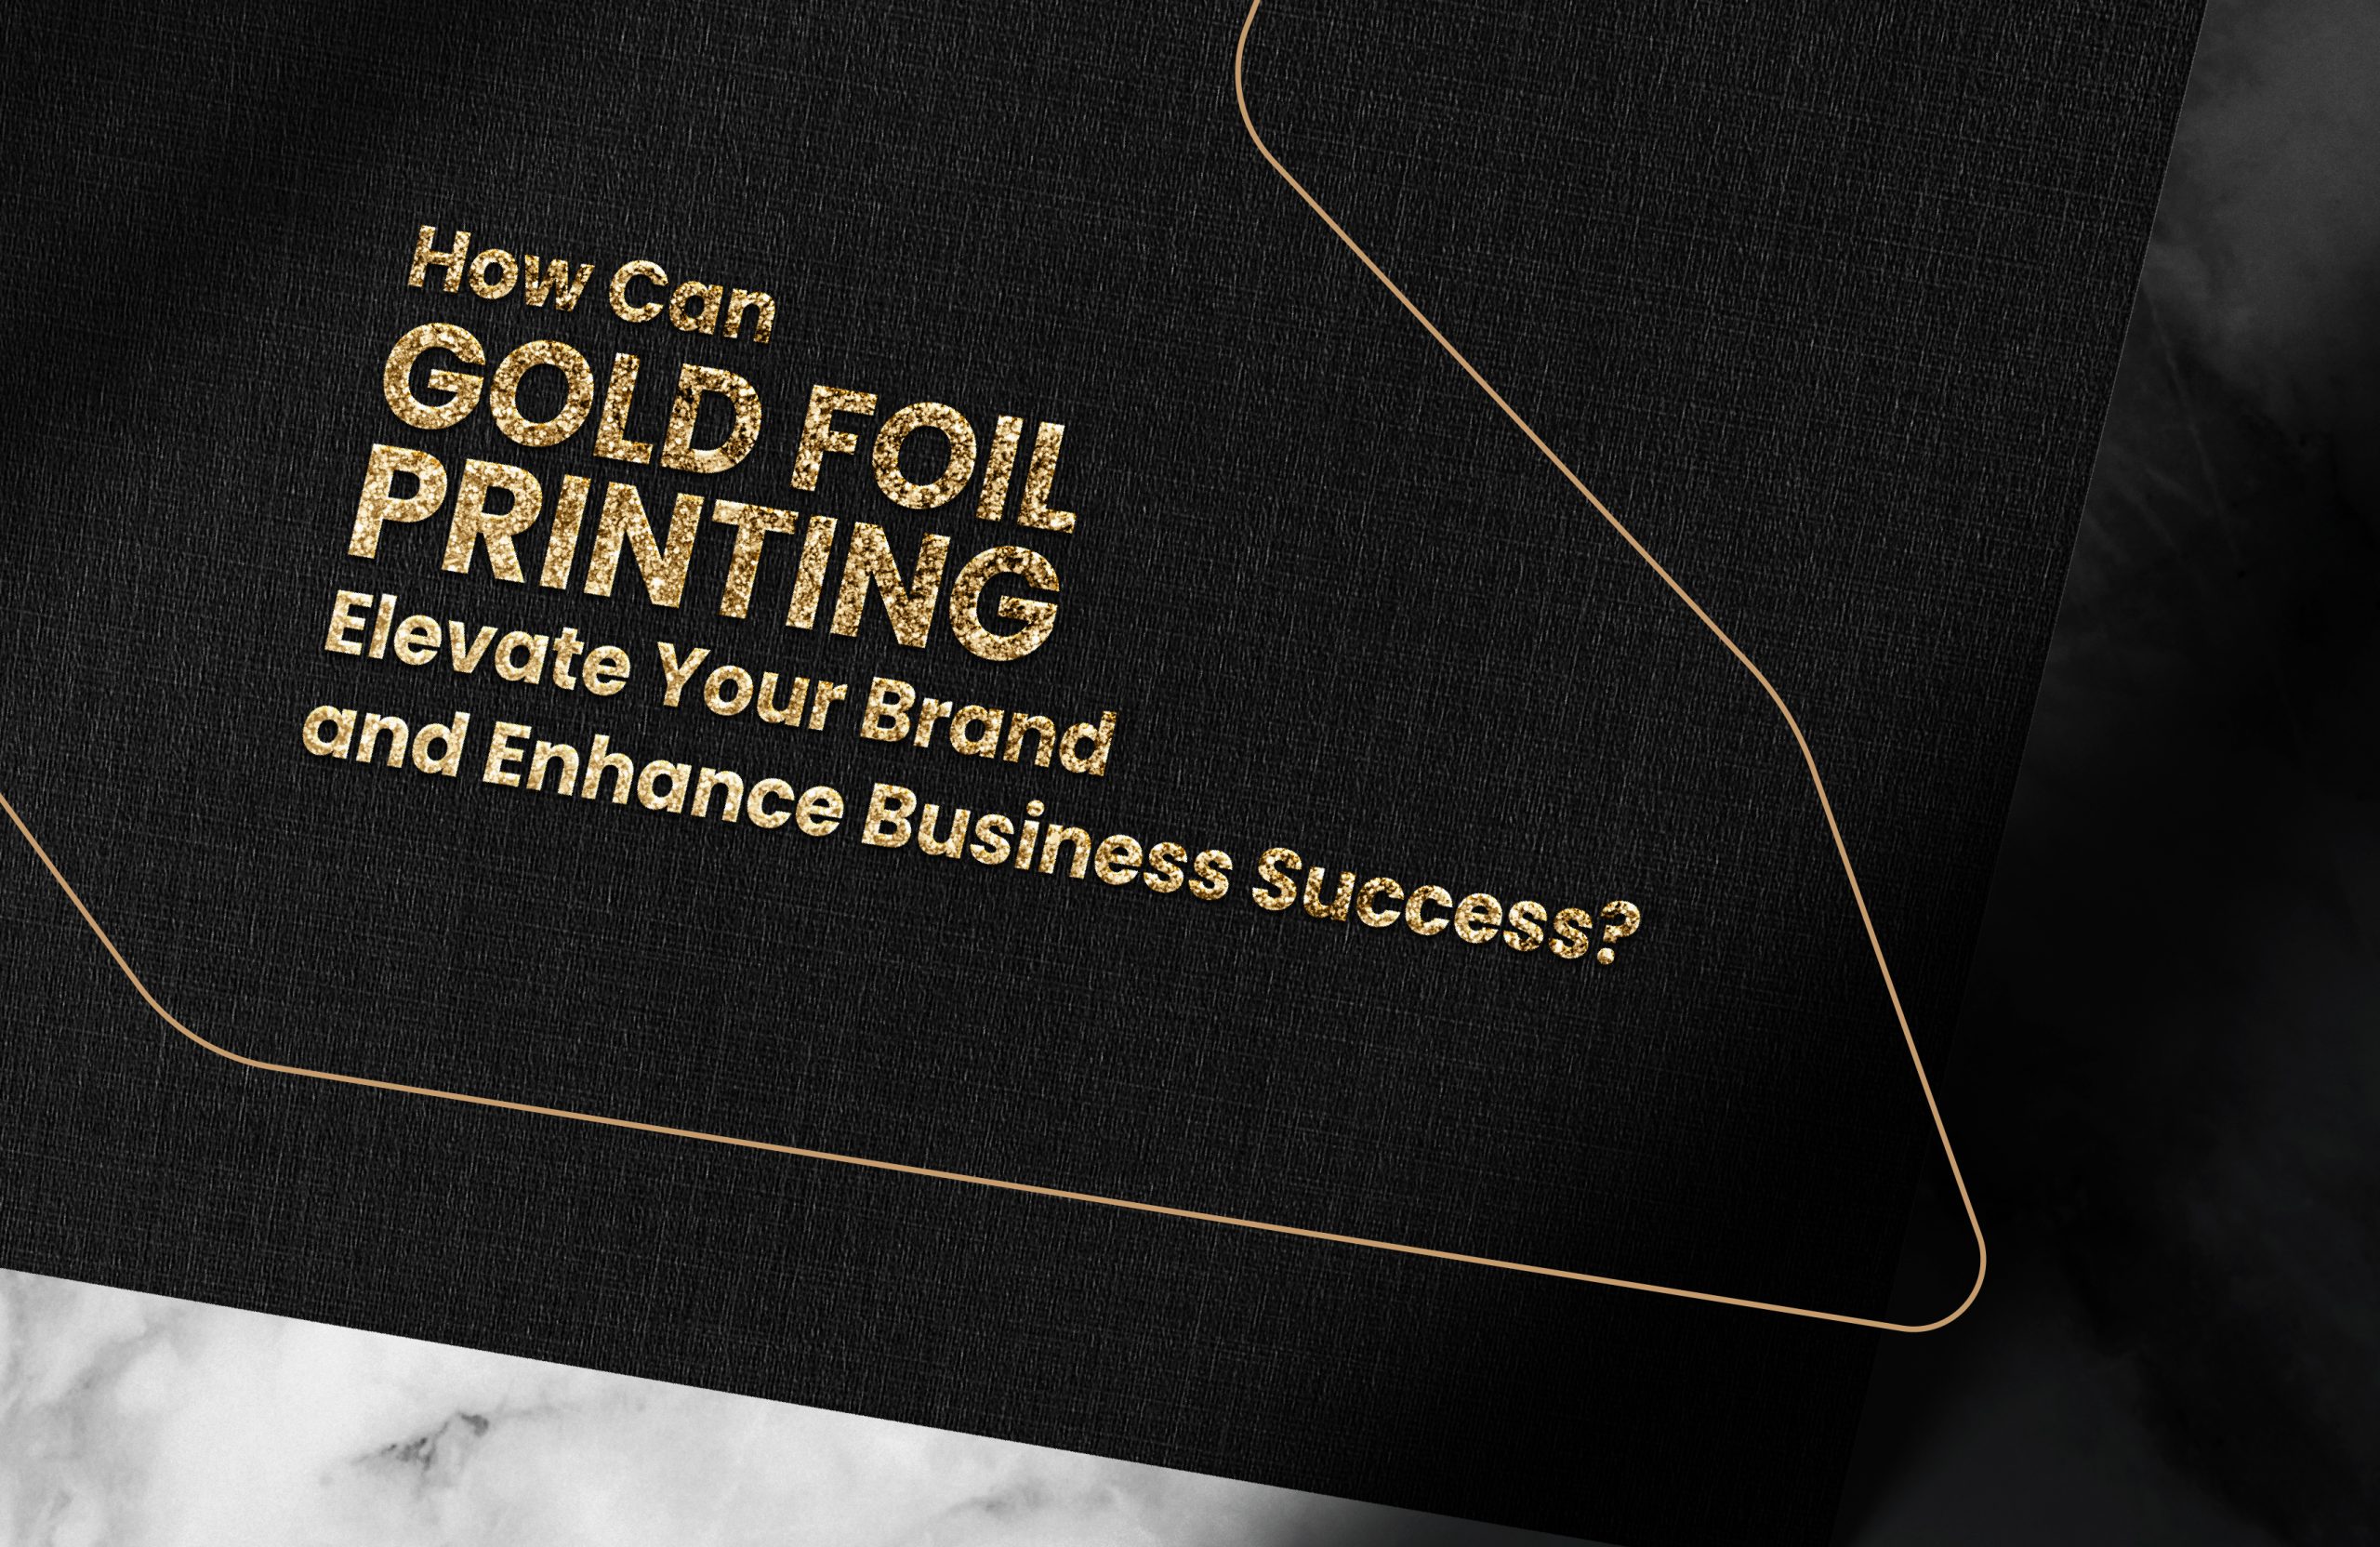 How Can Gold Foil Printing Elevate Your Brand and Enhance Business Success?